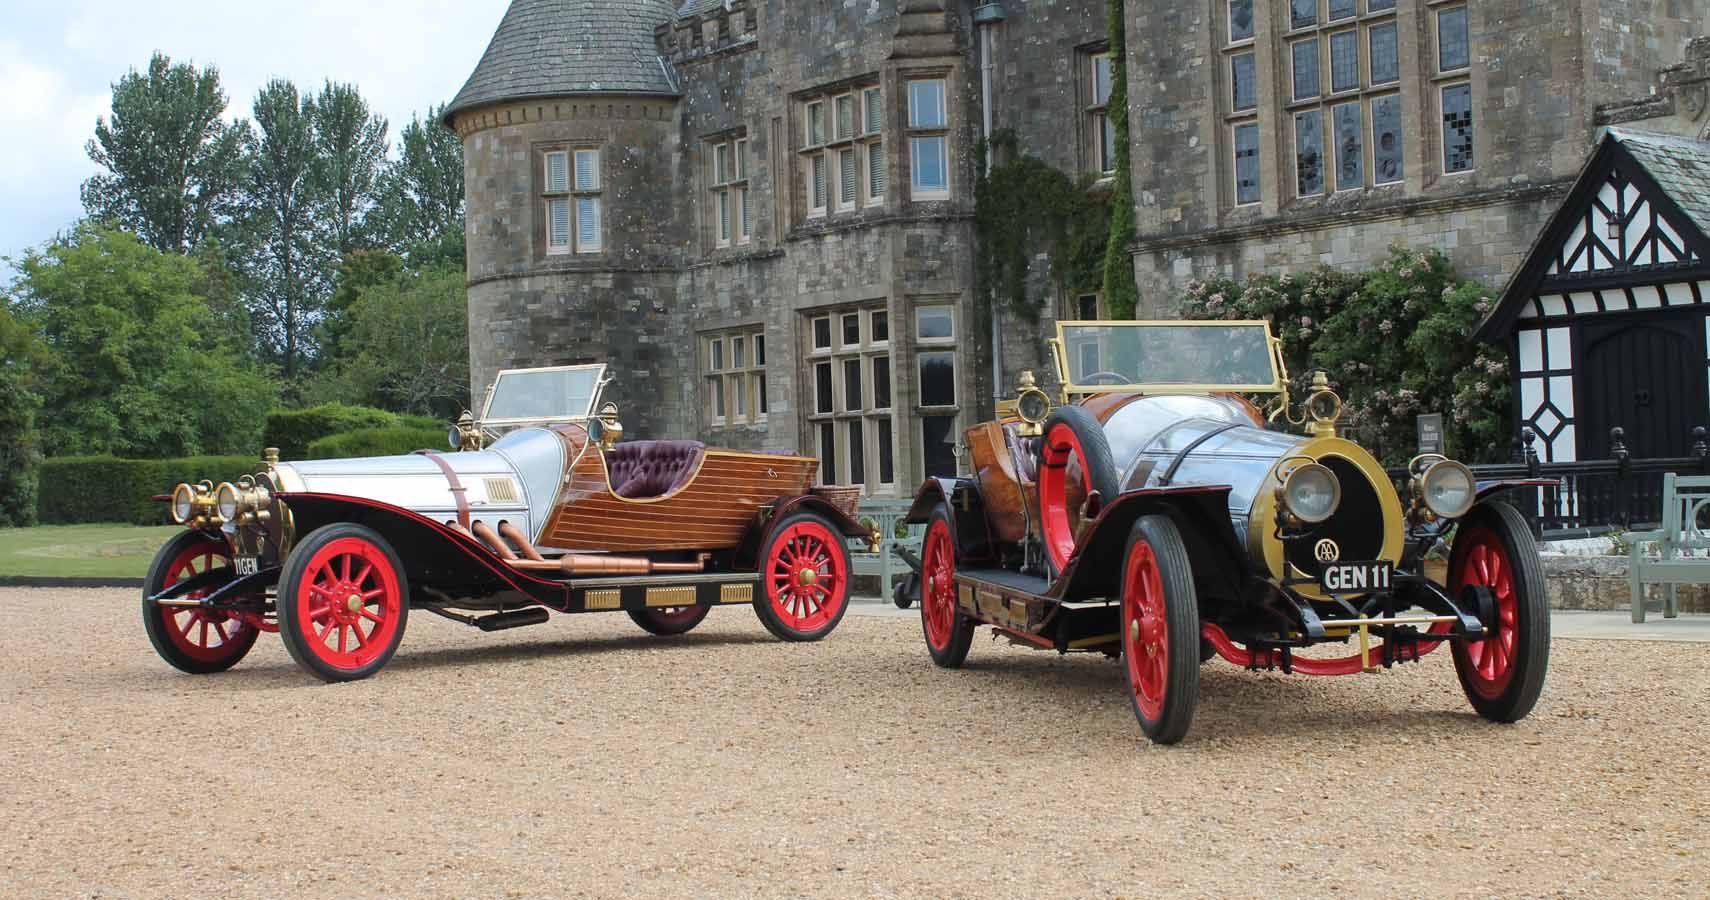 Chitty Chitty Bang Bang Movie Cars At An Exhibition Outside The Palace House